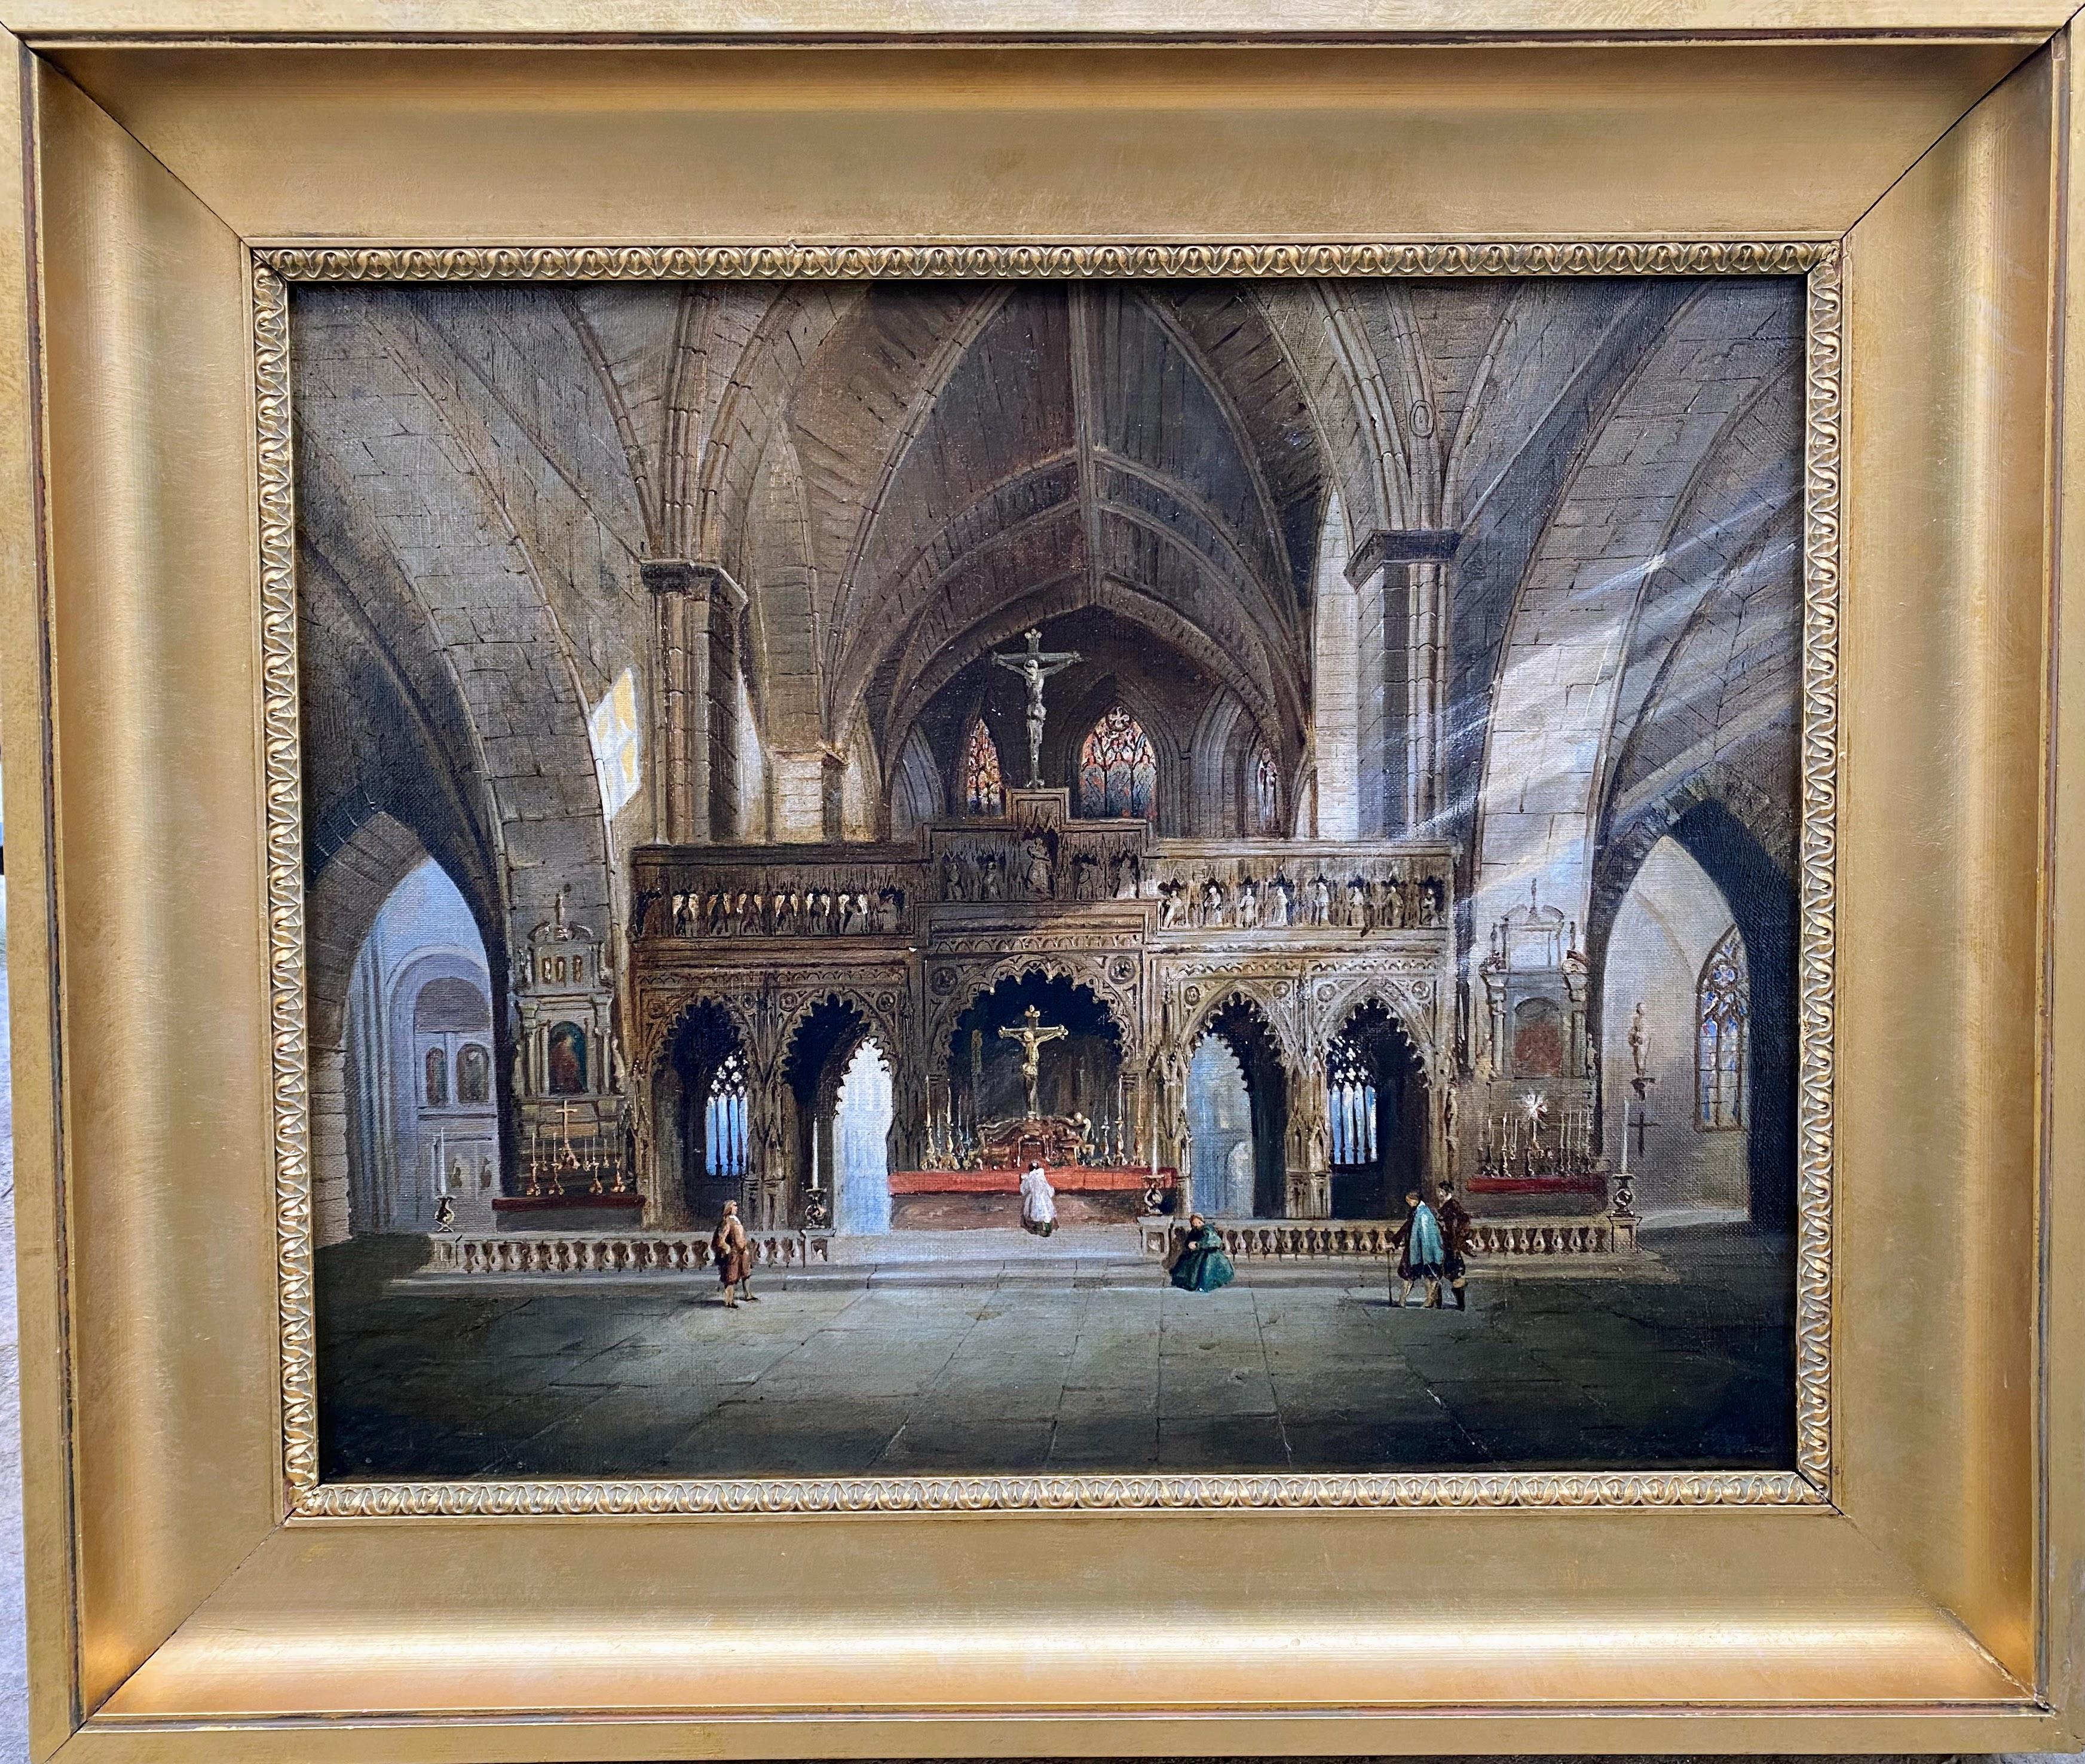 Henri Schäfer Interior Painting - Light flooded cathedral interior, gothic architecture, stained glass windows